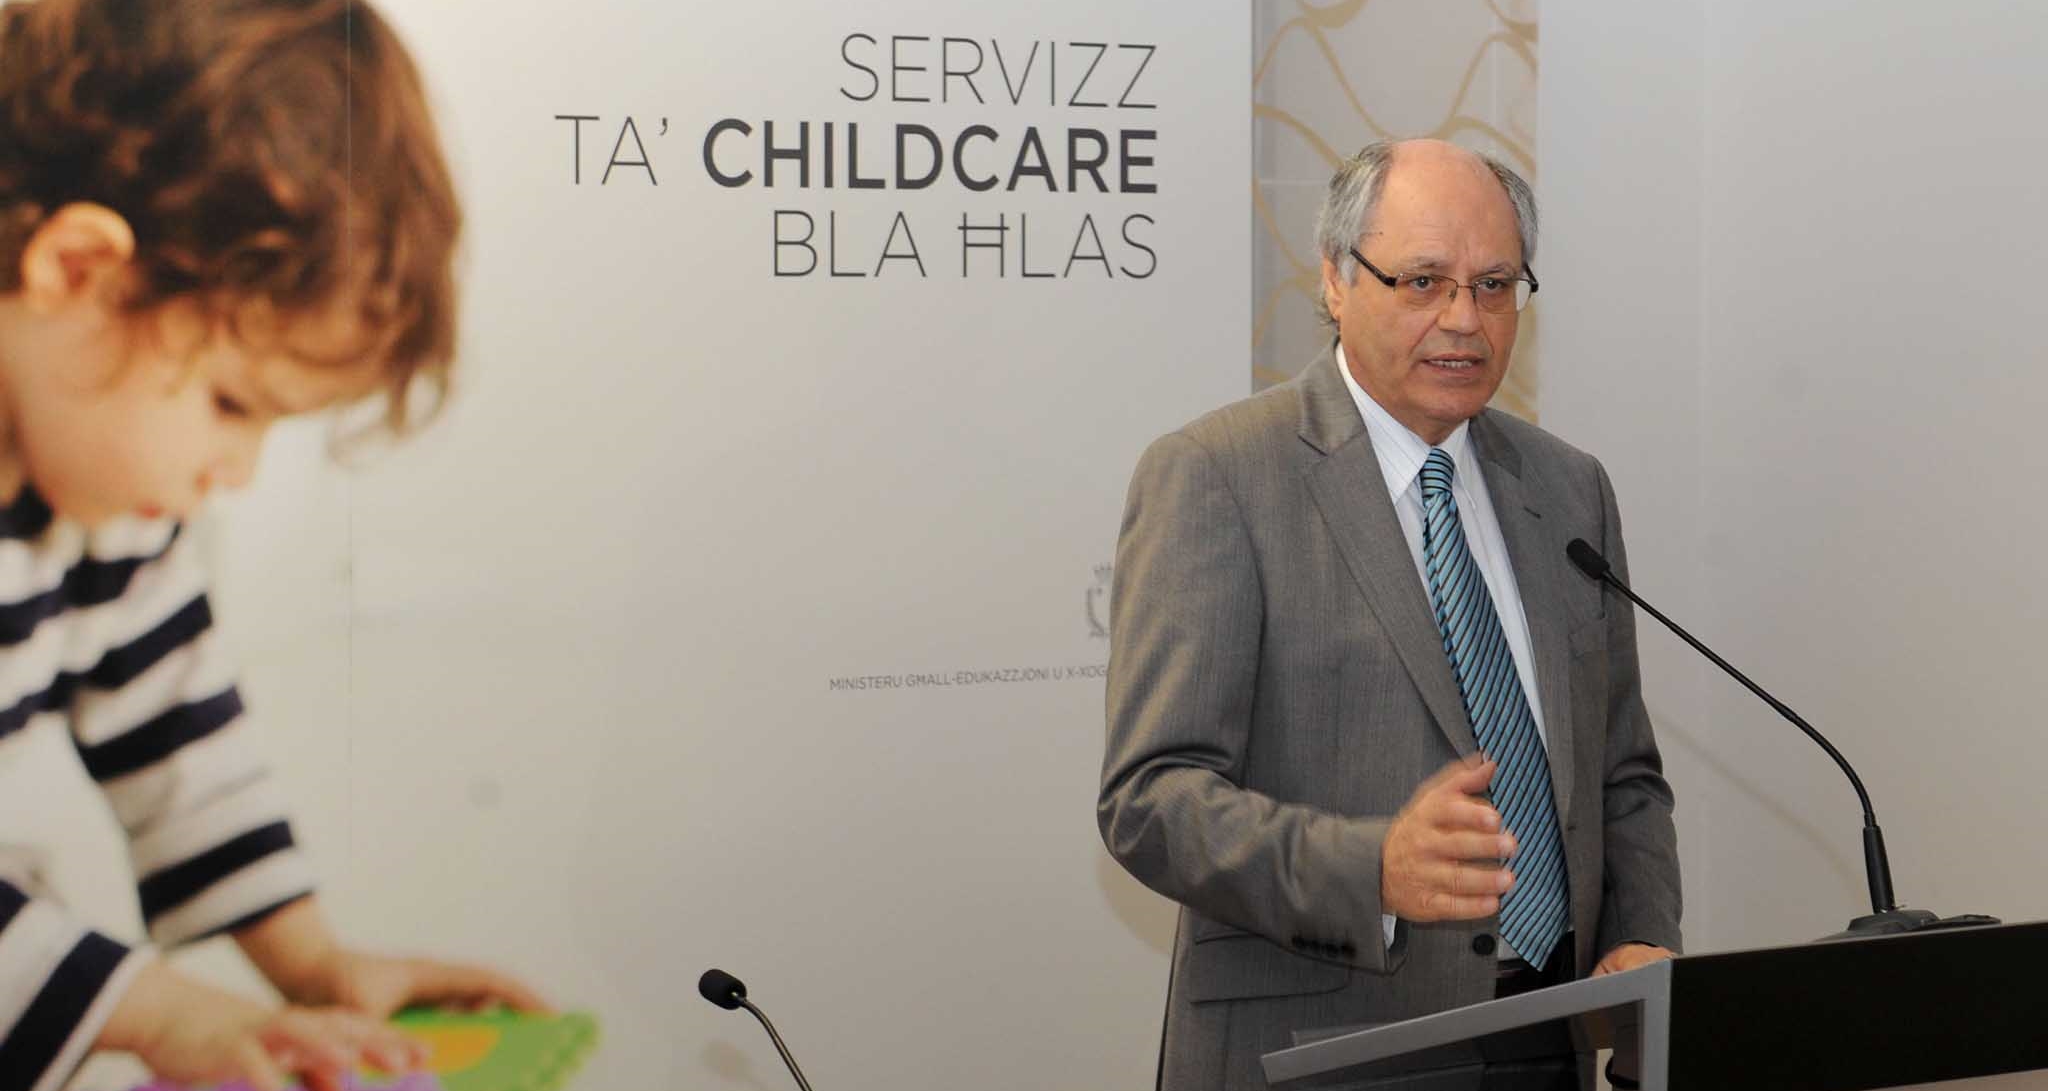 Childcare to Start Next Week following Signing with Service Providers